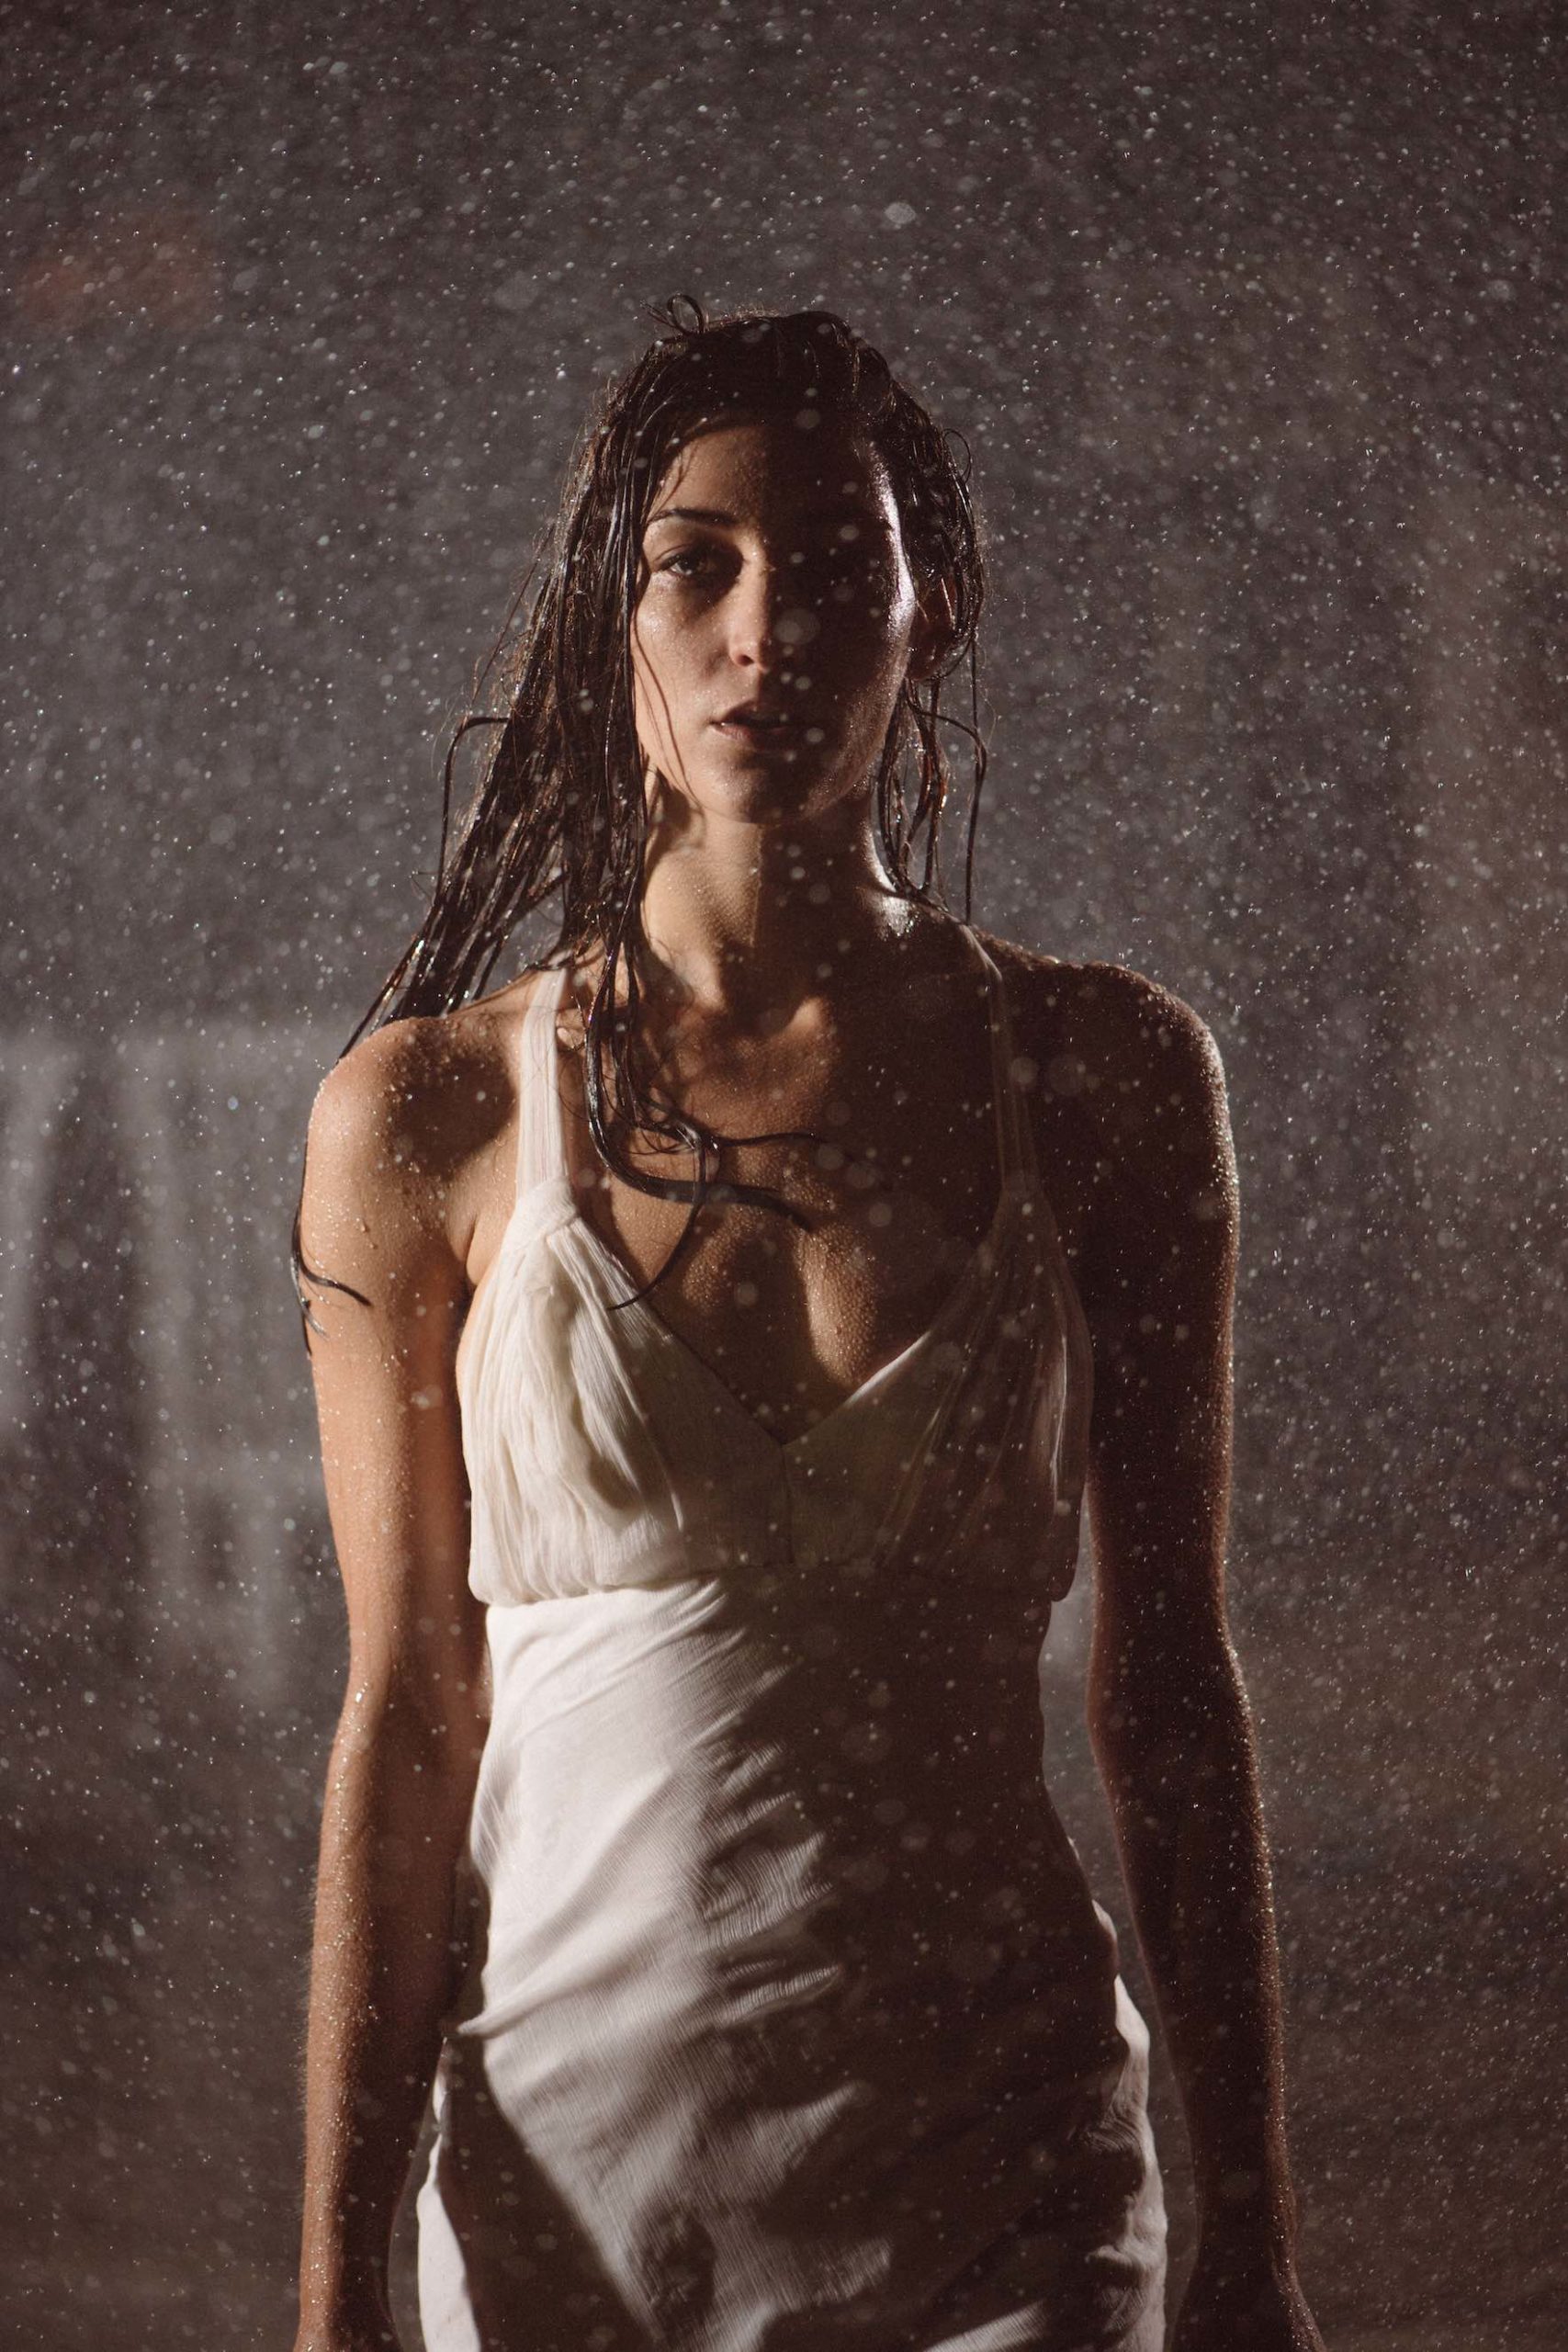 Woman with long hair wearing a white dress posing for camera under a shower of water